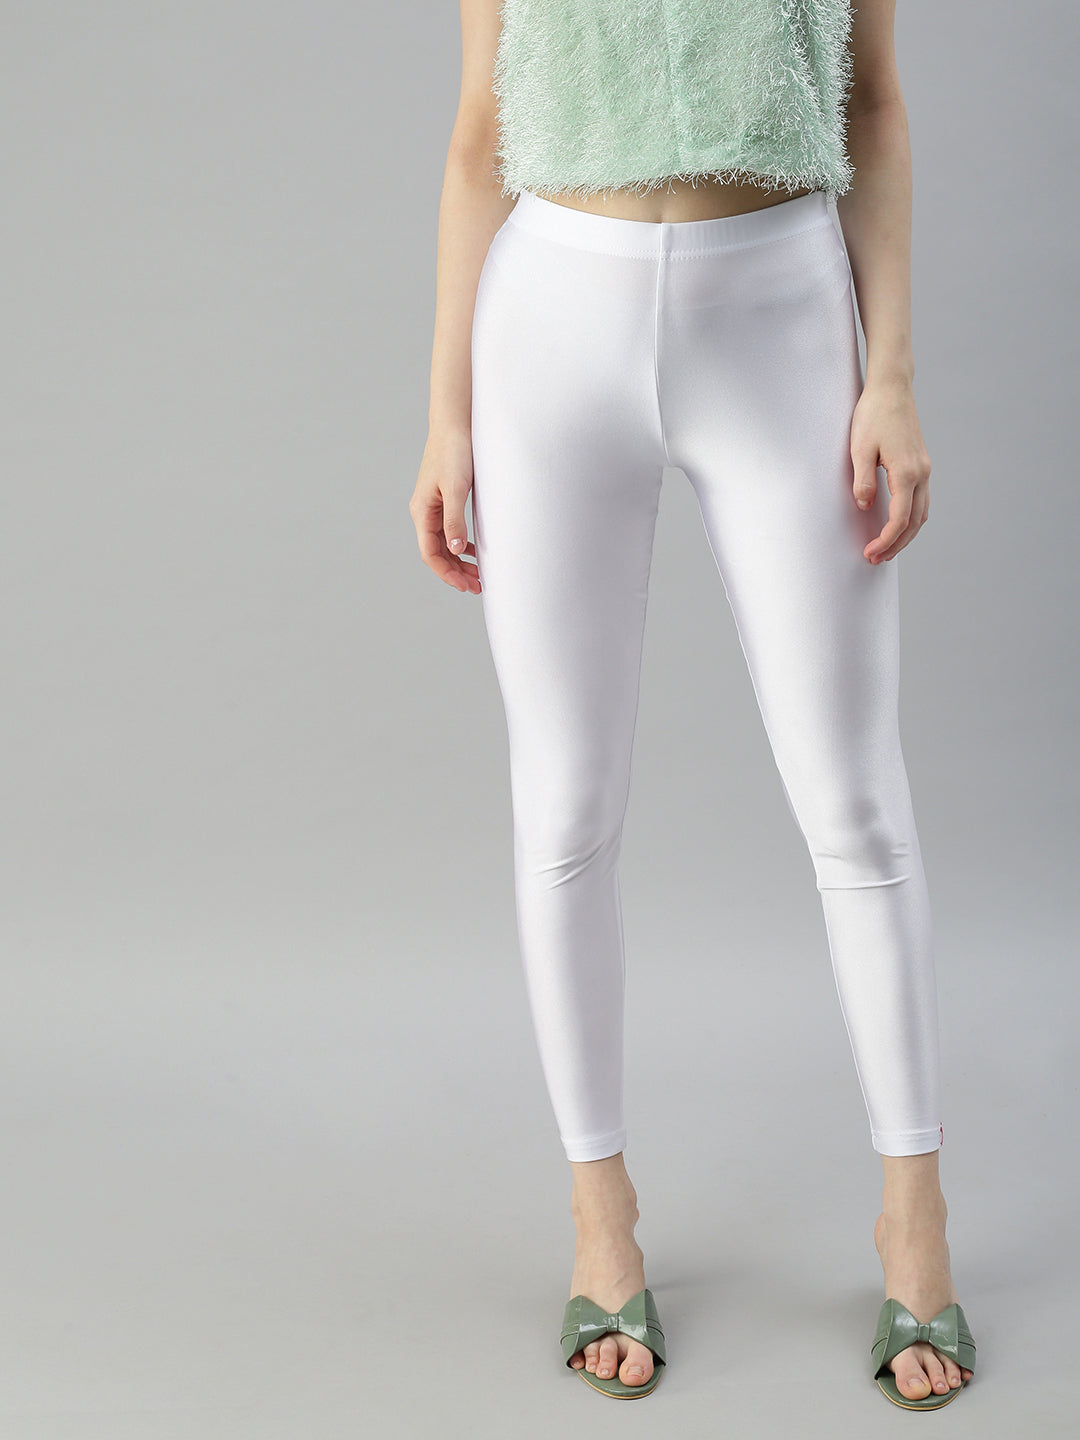 Get the Perfect Look with Prisma's White Shimmer Leggings